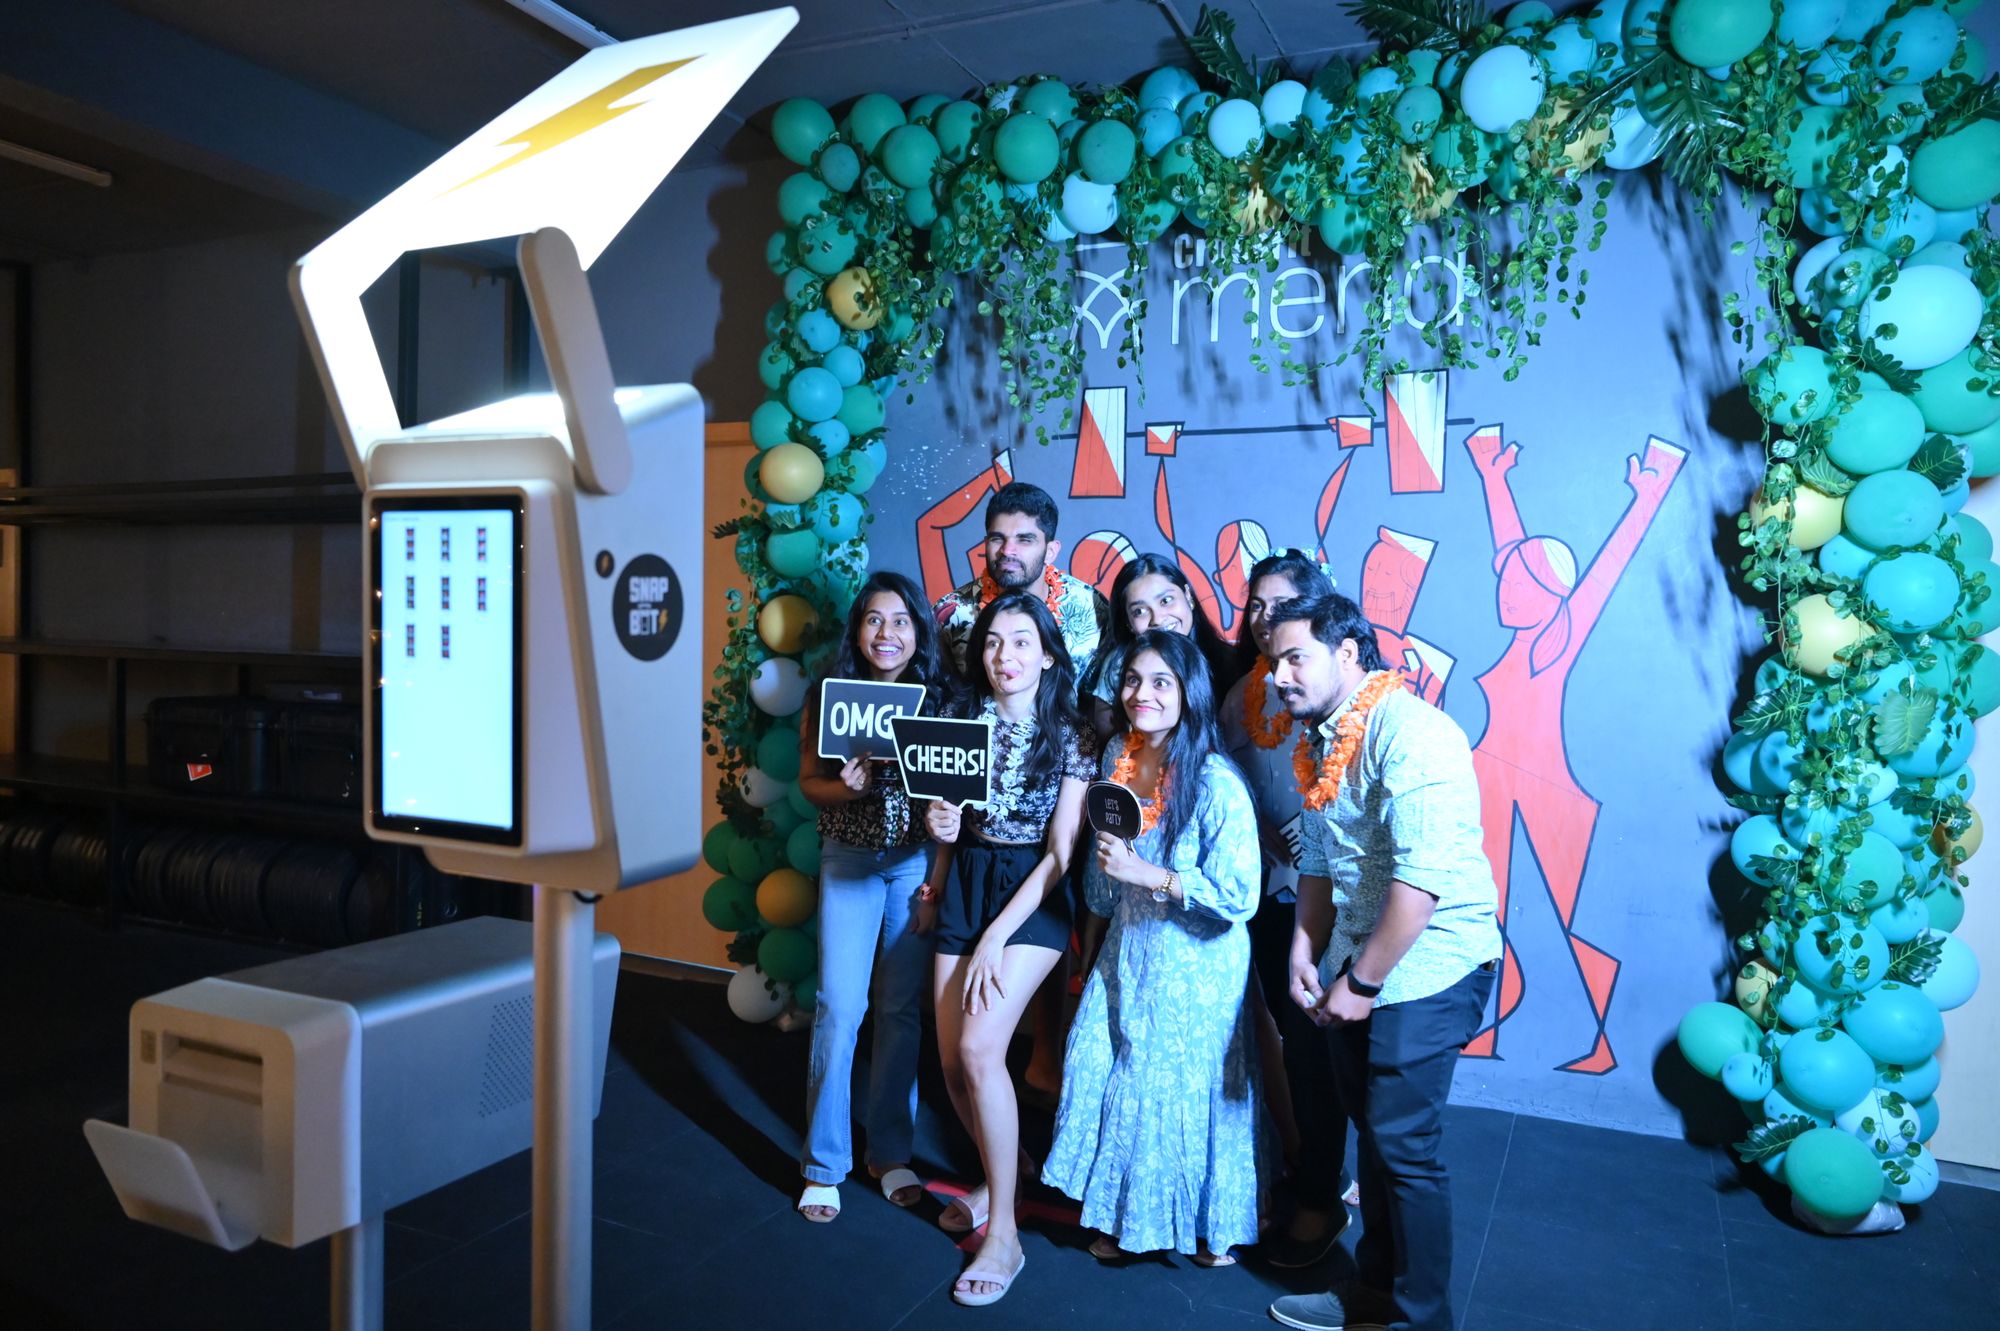 Strike a pose! Here's why every event needs a photobooth